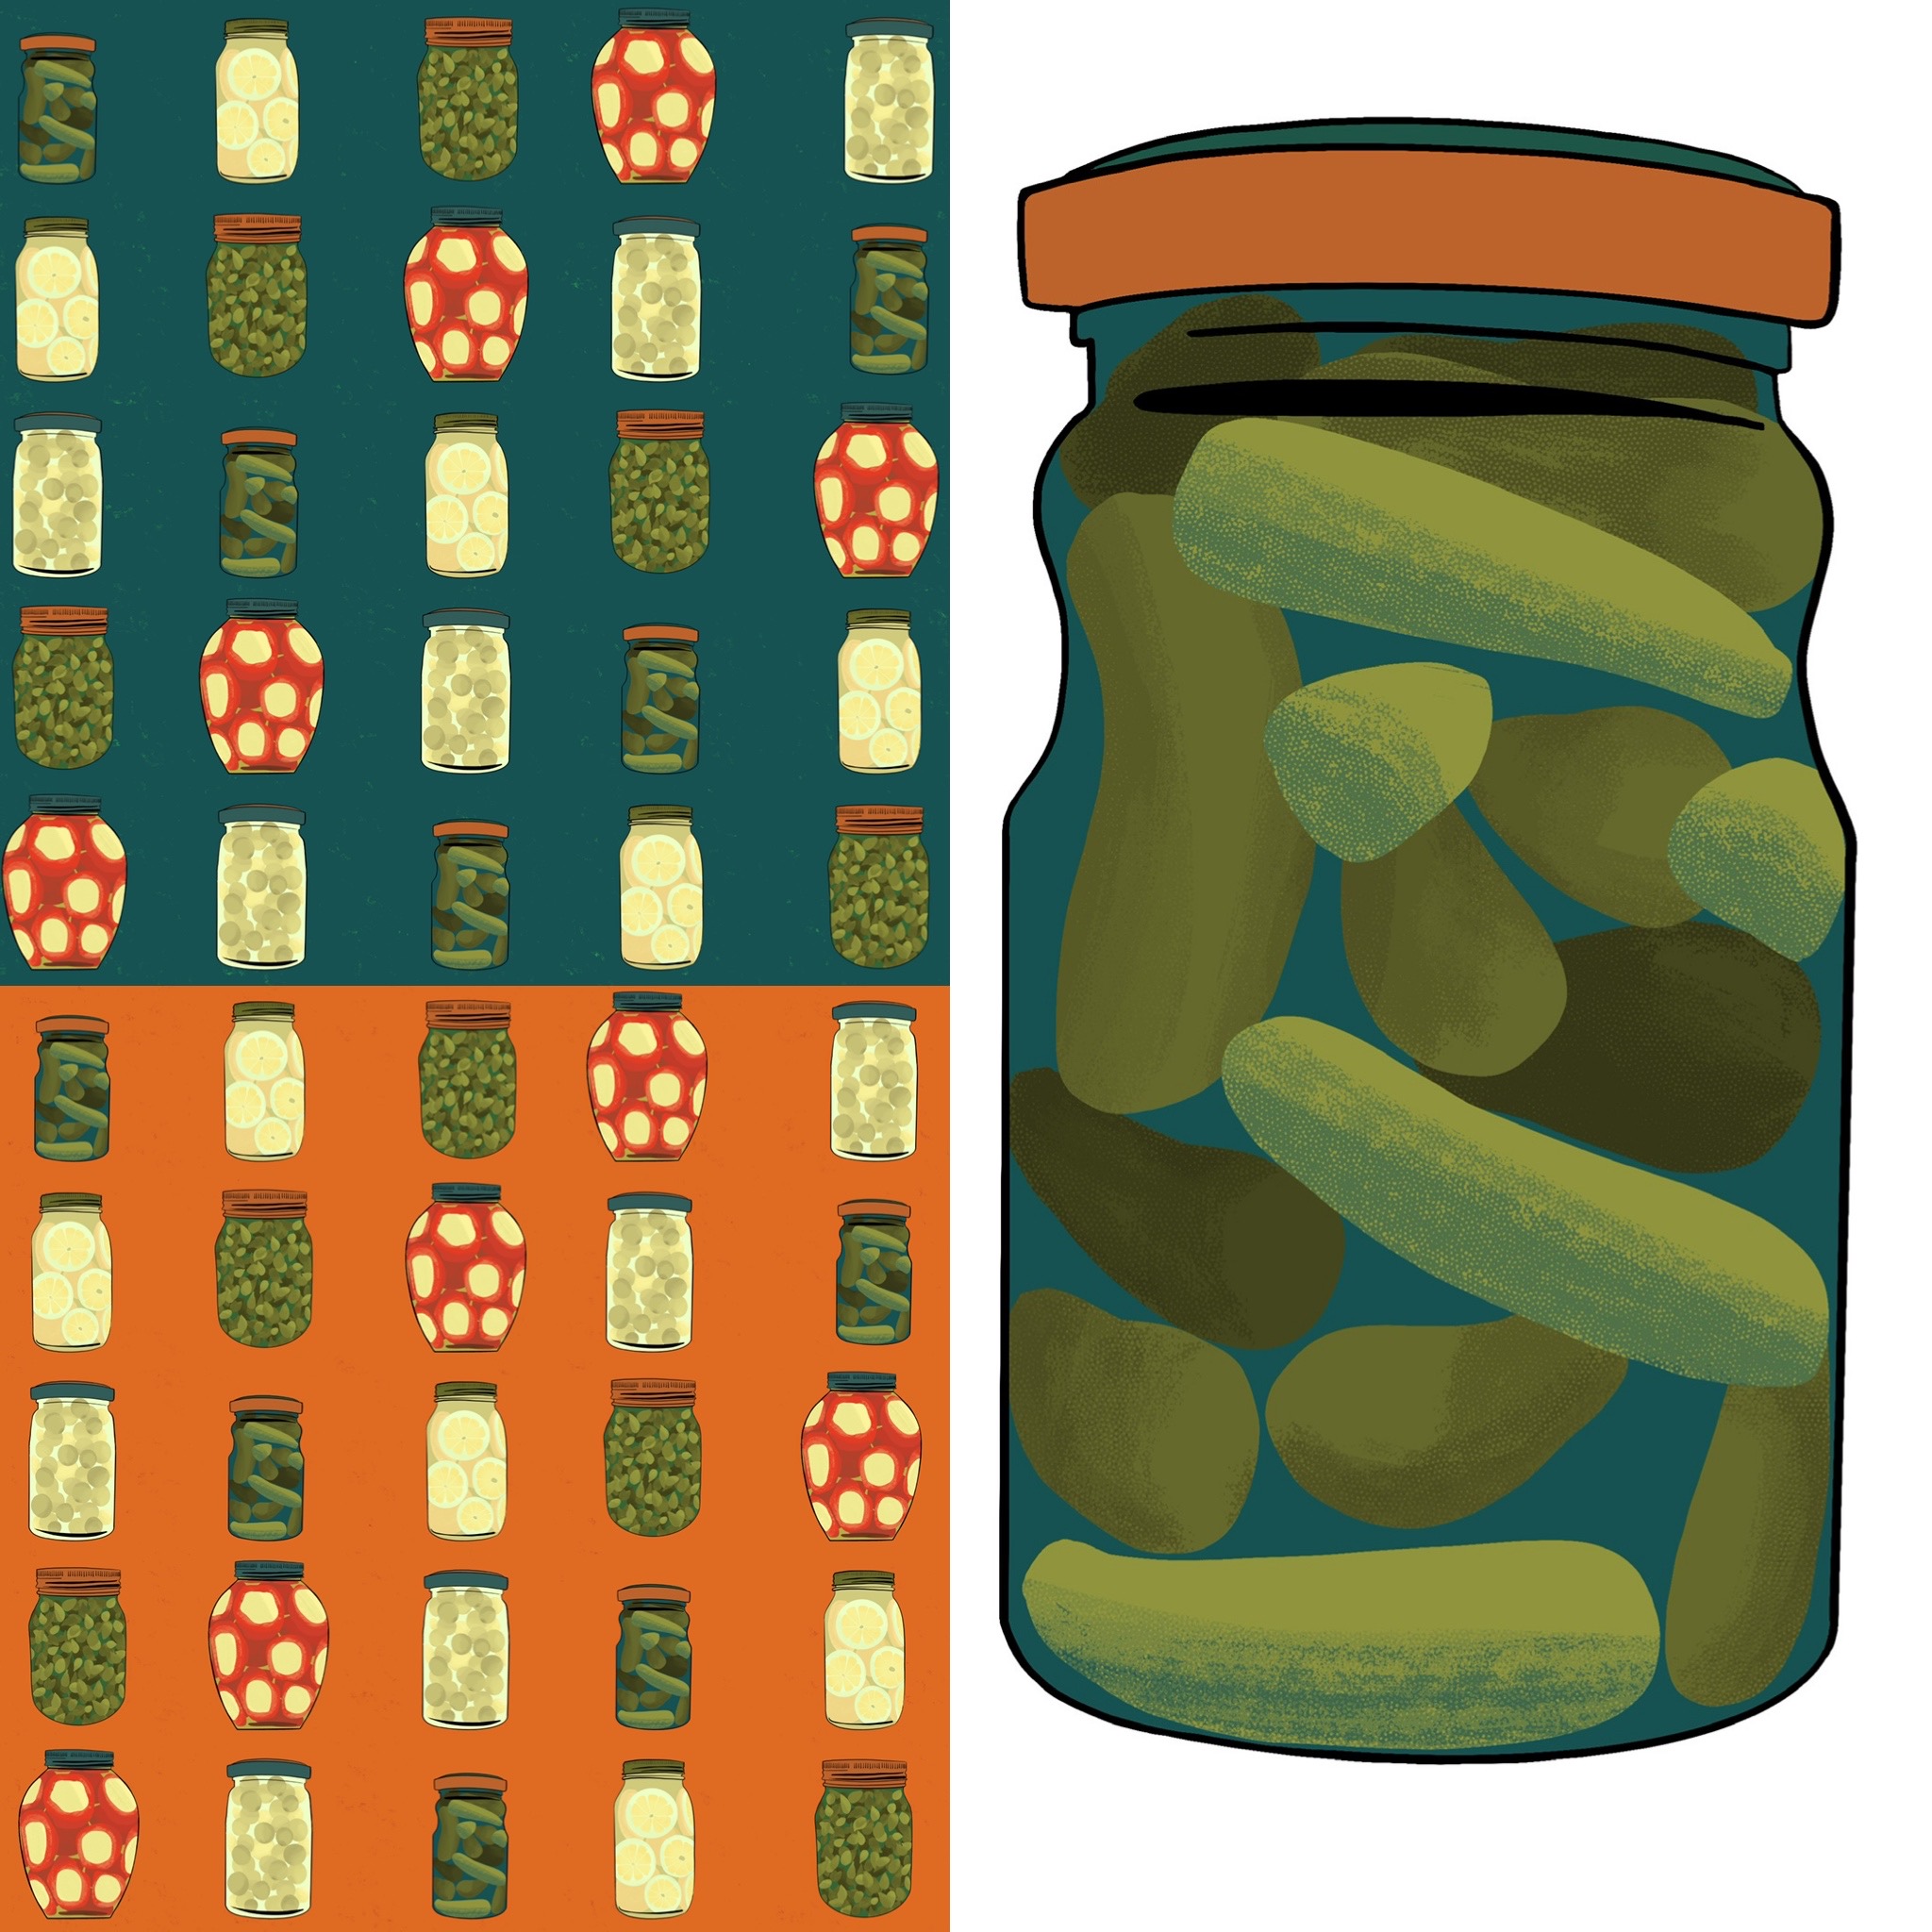 Pattern Design in orange and teal featuring pickles by Eleanore Ditchburn.